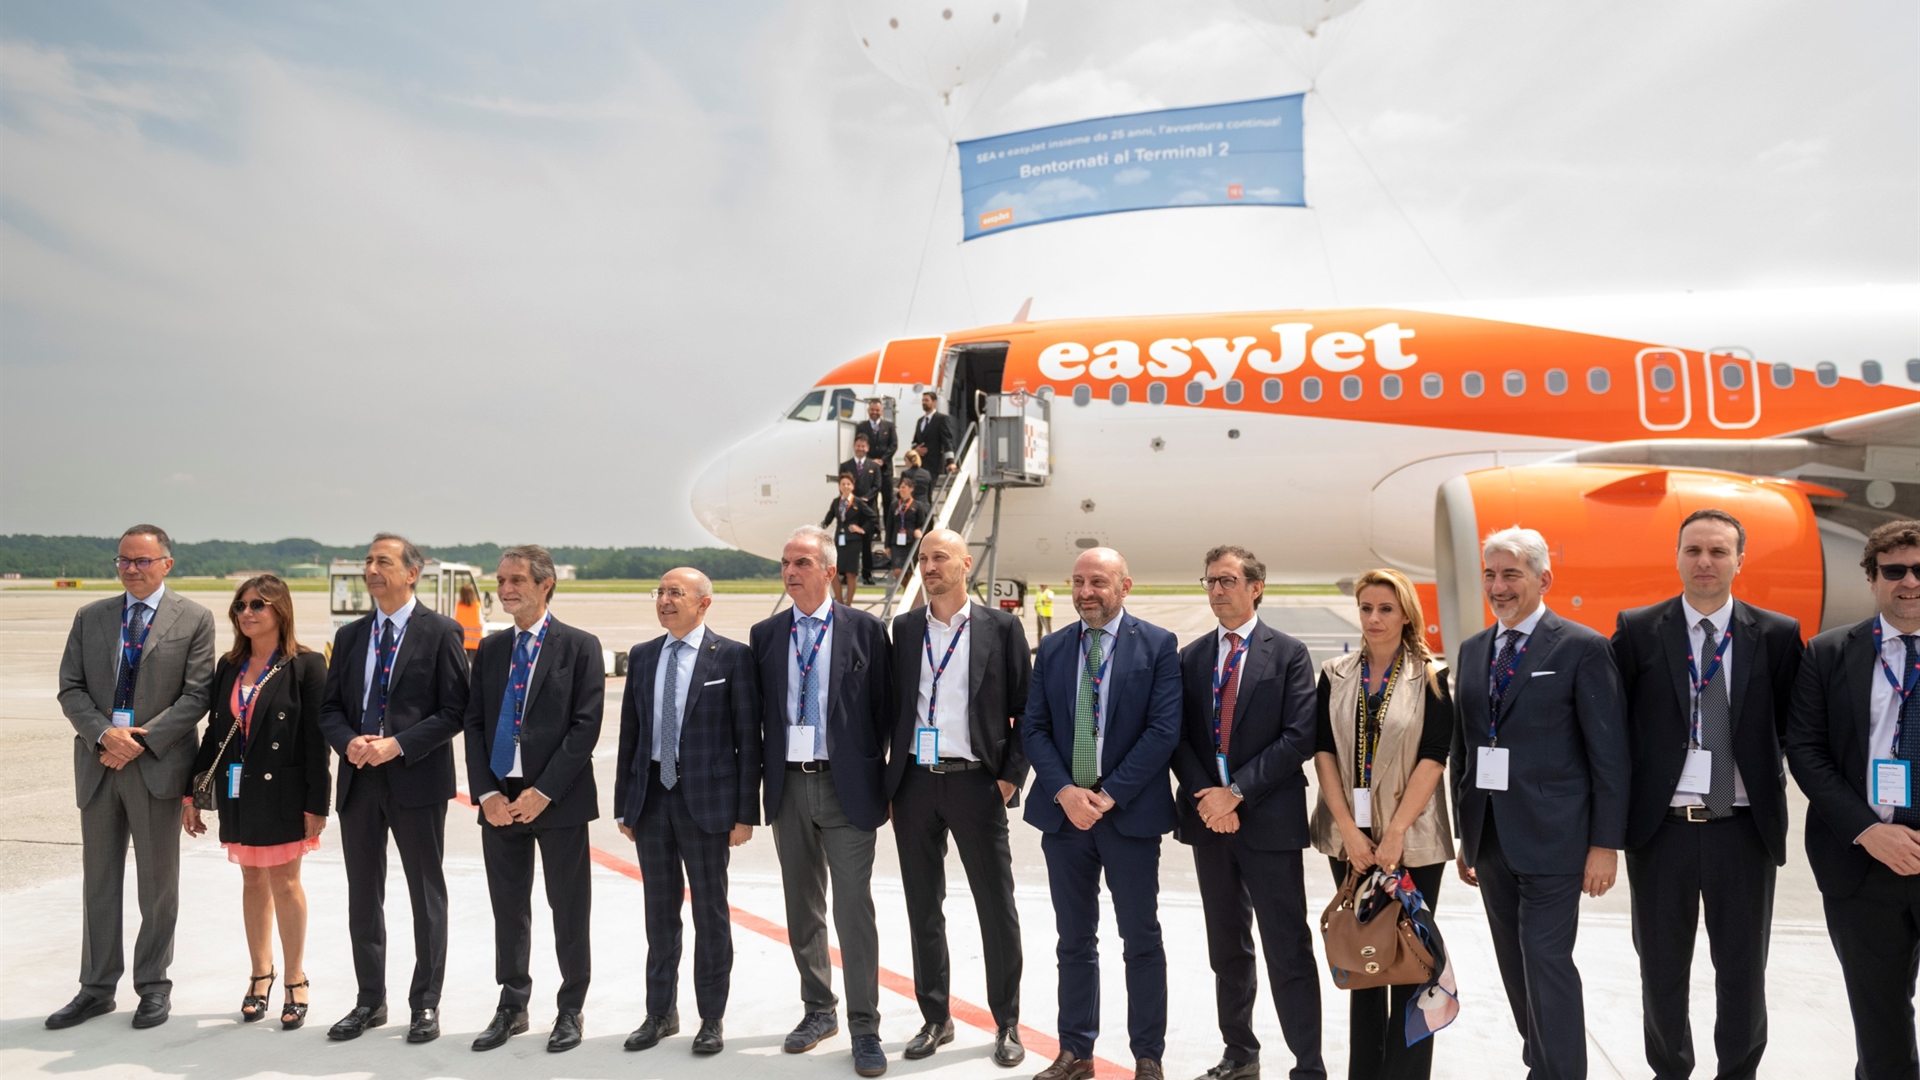 SEA and easyJet: Terminal 2 of Milano Malpensa reopens on 31 May